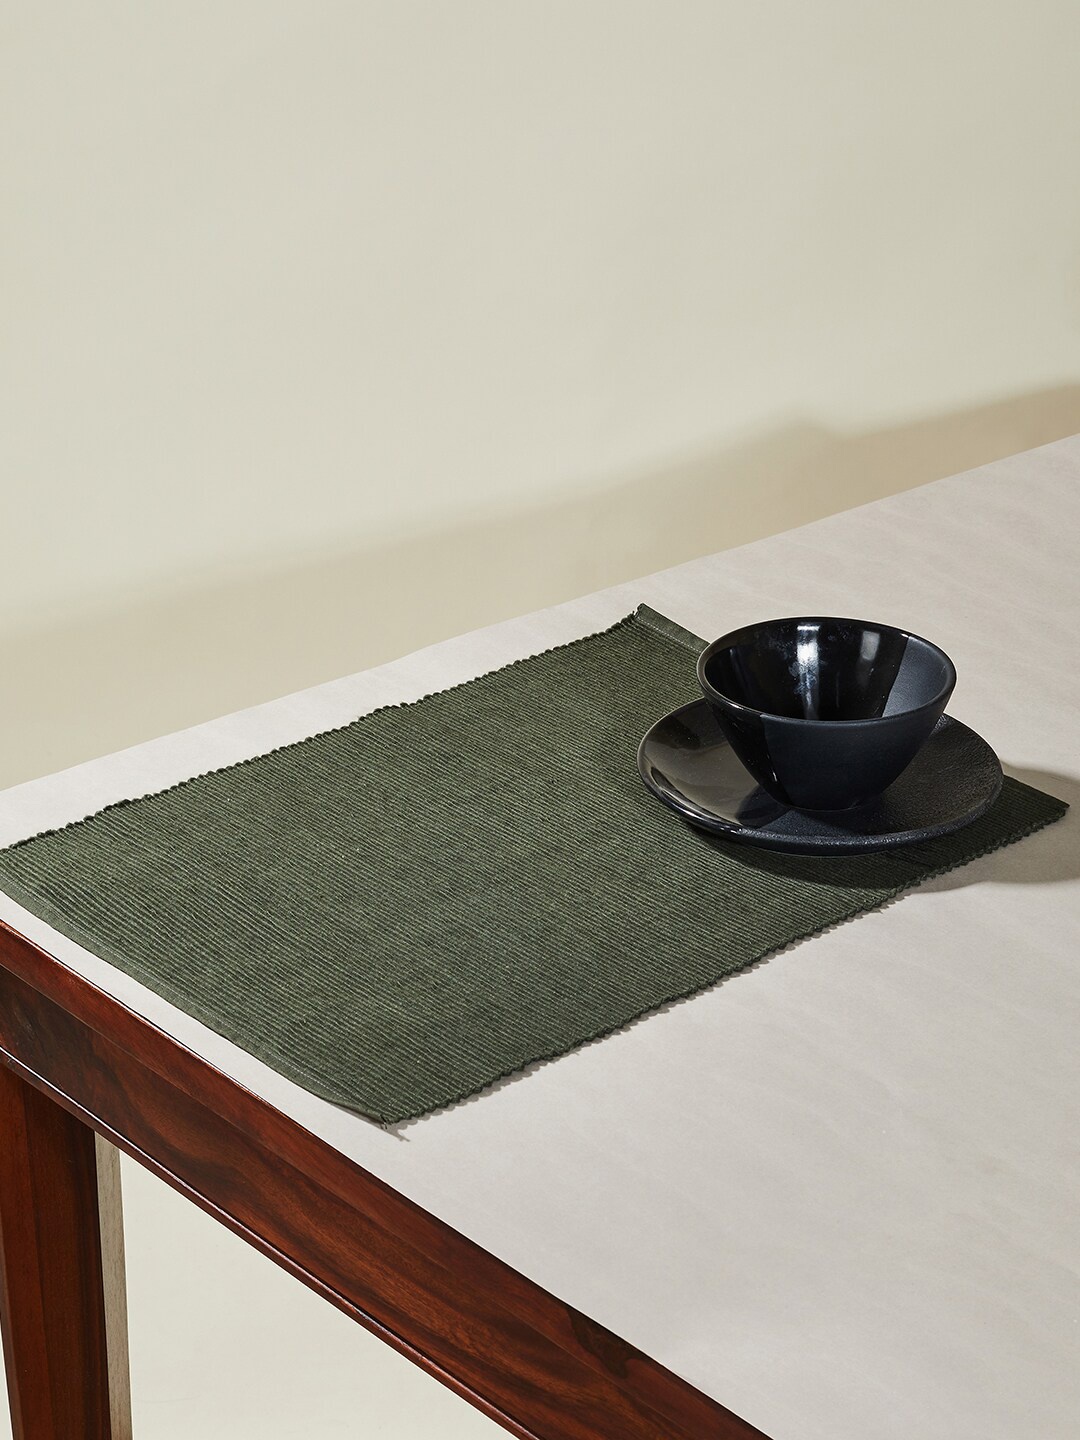 

Fabindia Set of 6 Green Textured Cotton Table Placemats